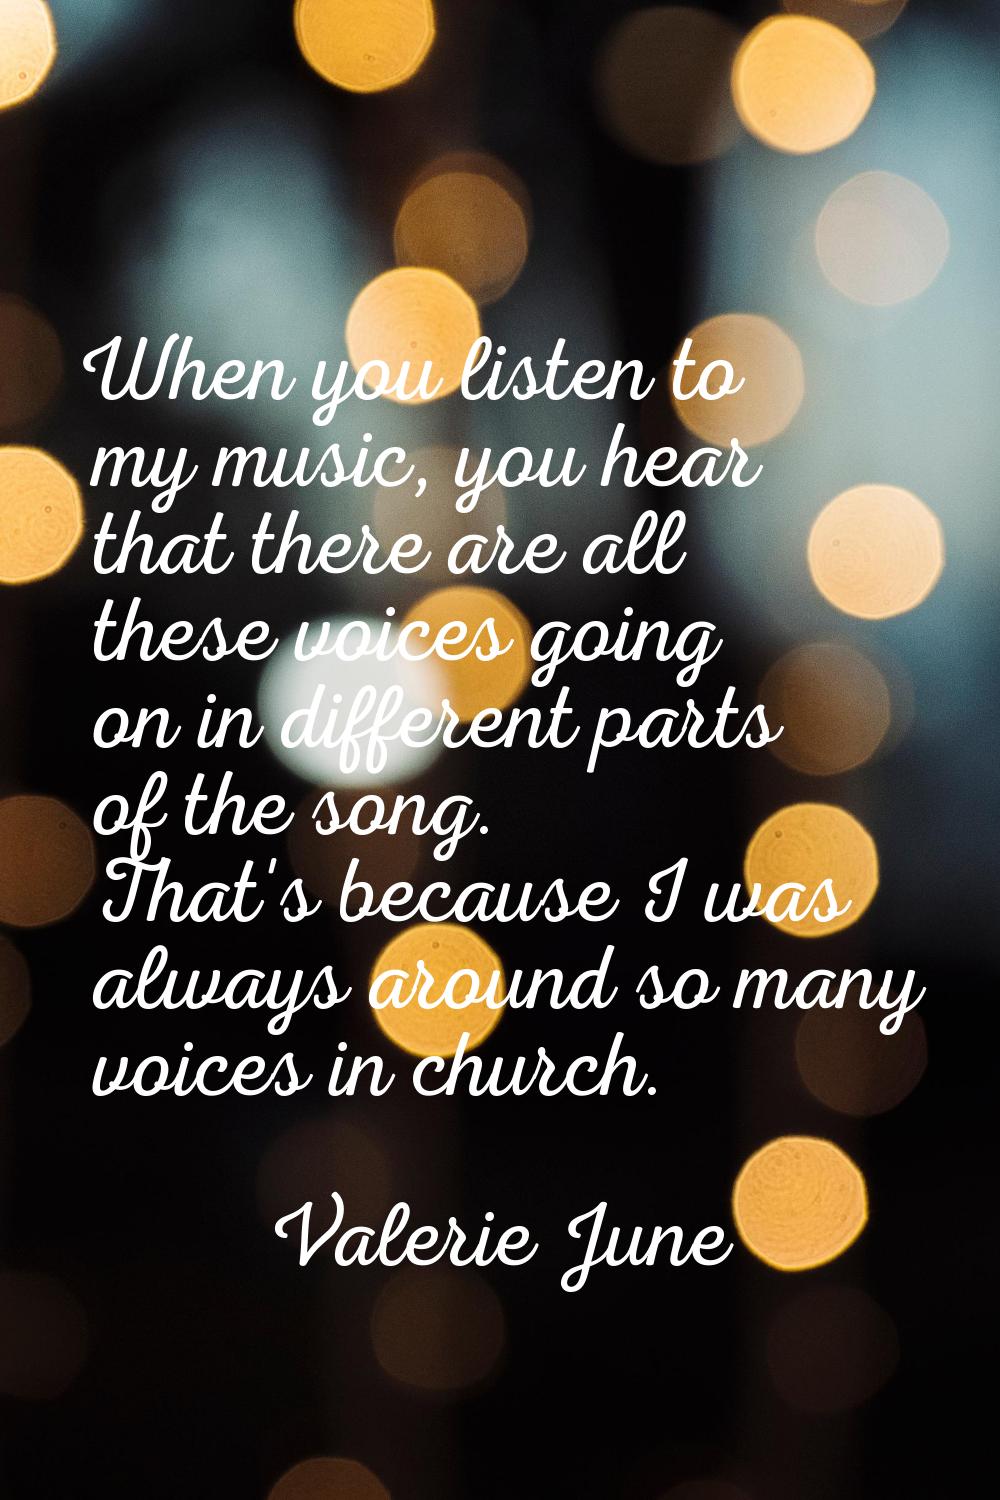 When you listen to my music, you hear that there are all these voices going on in different parts o